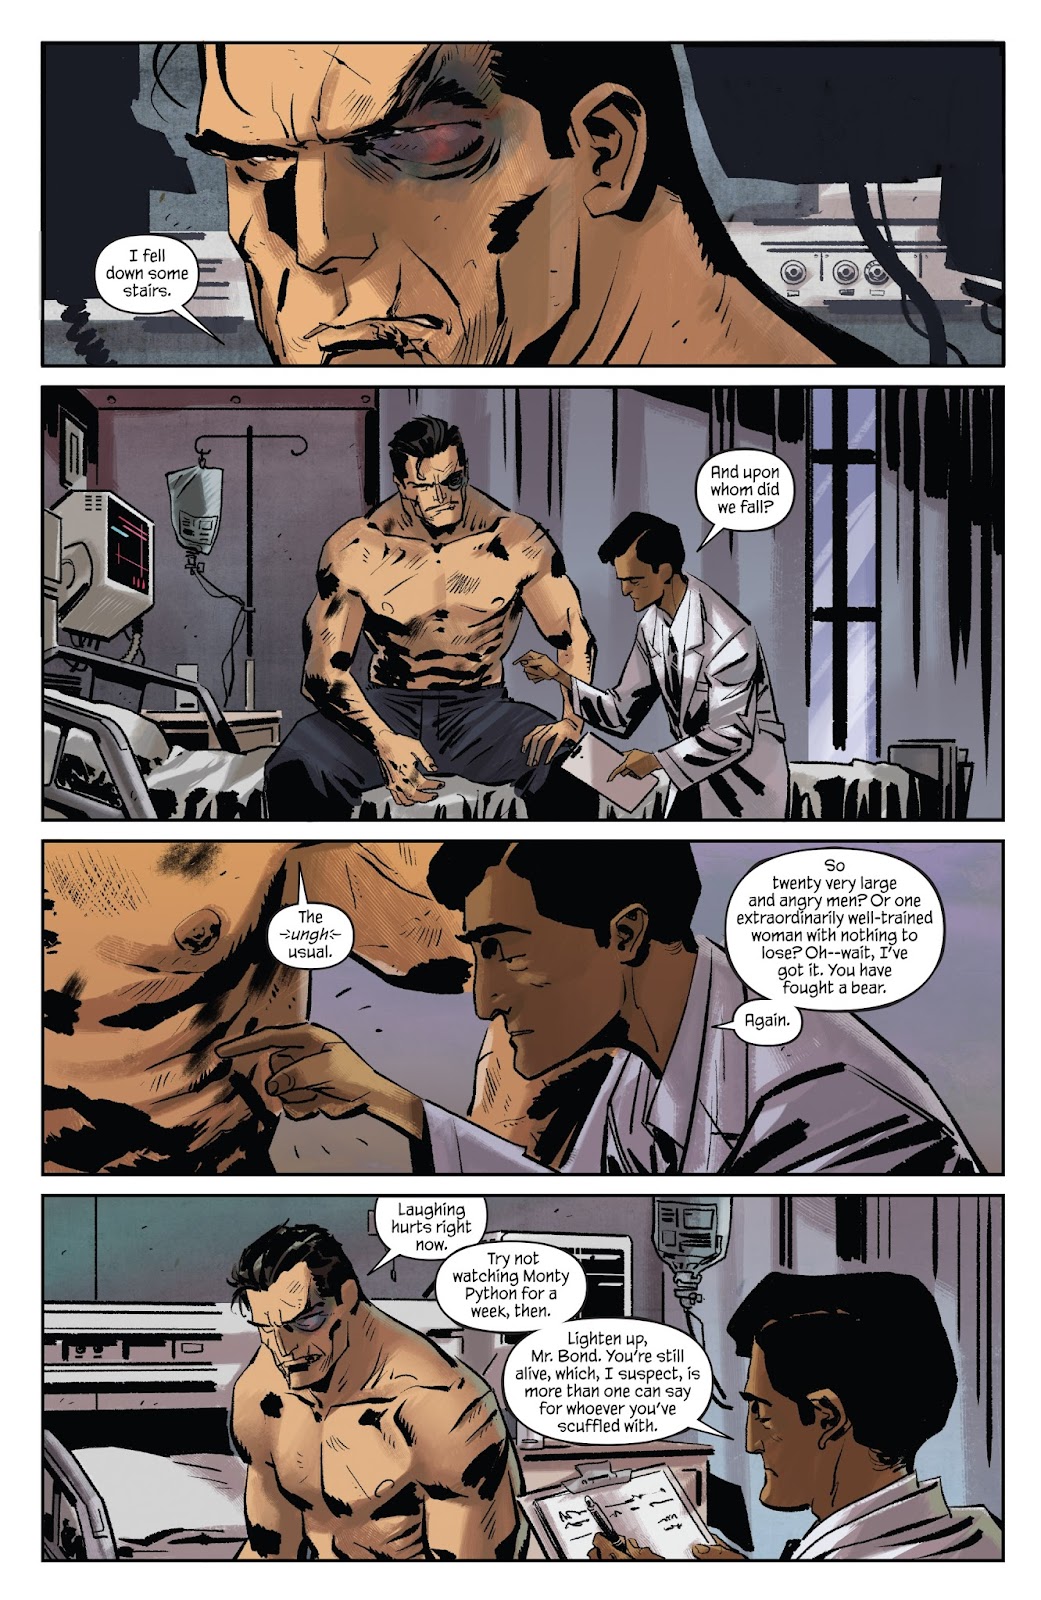 James Bond: The Body issue 1 - Page 4